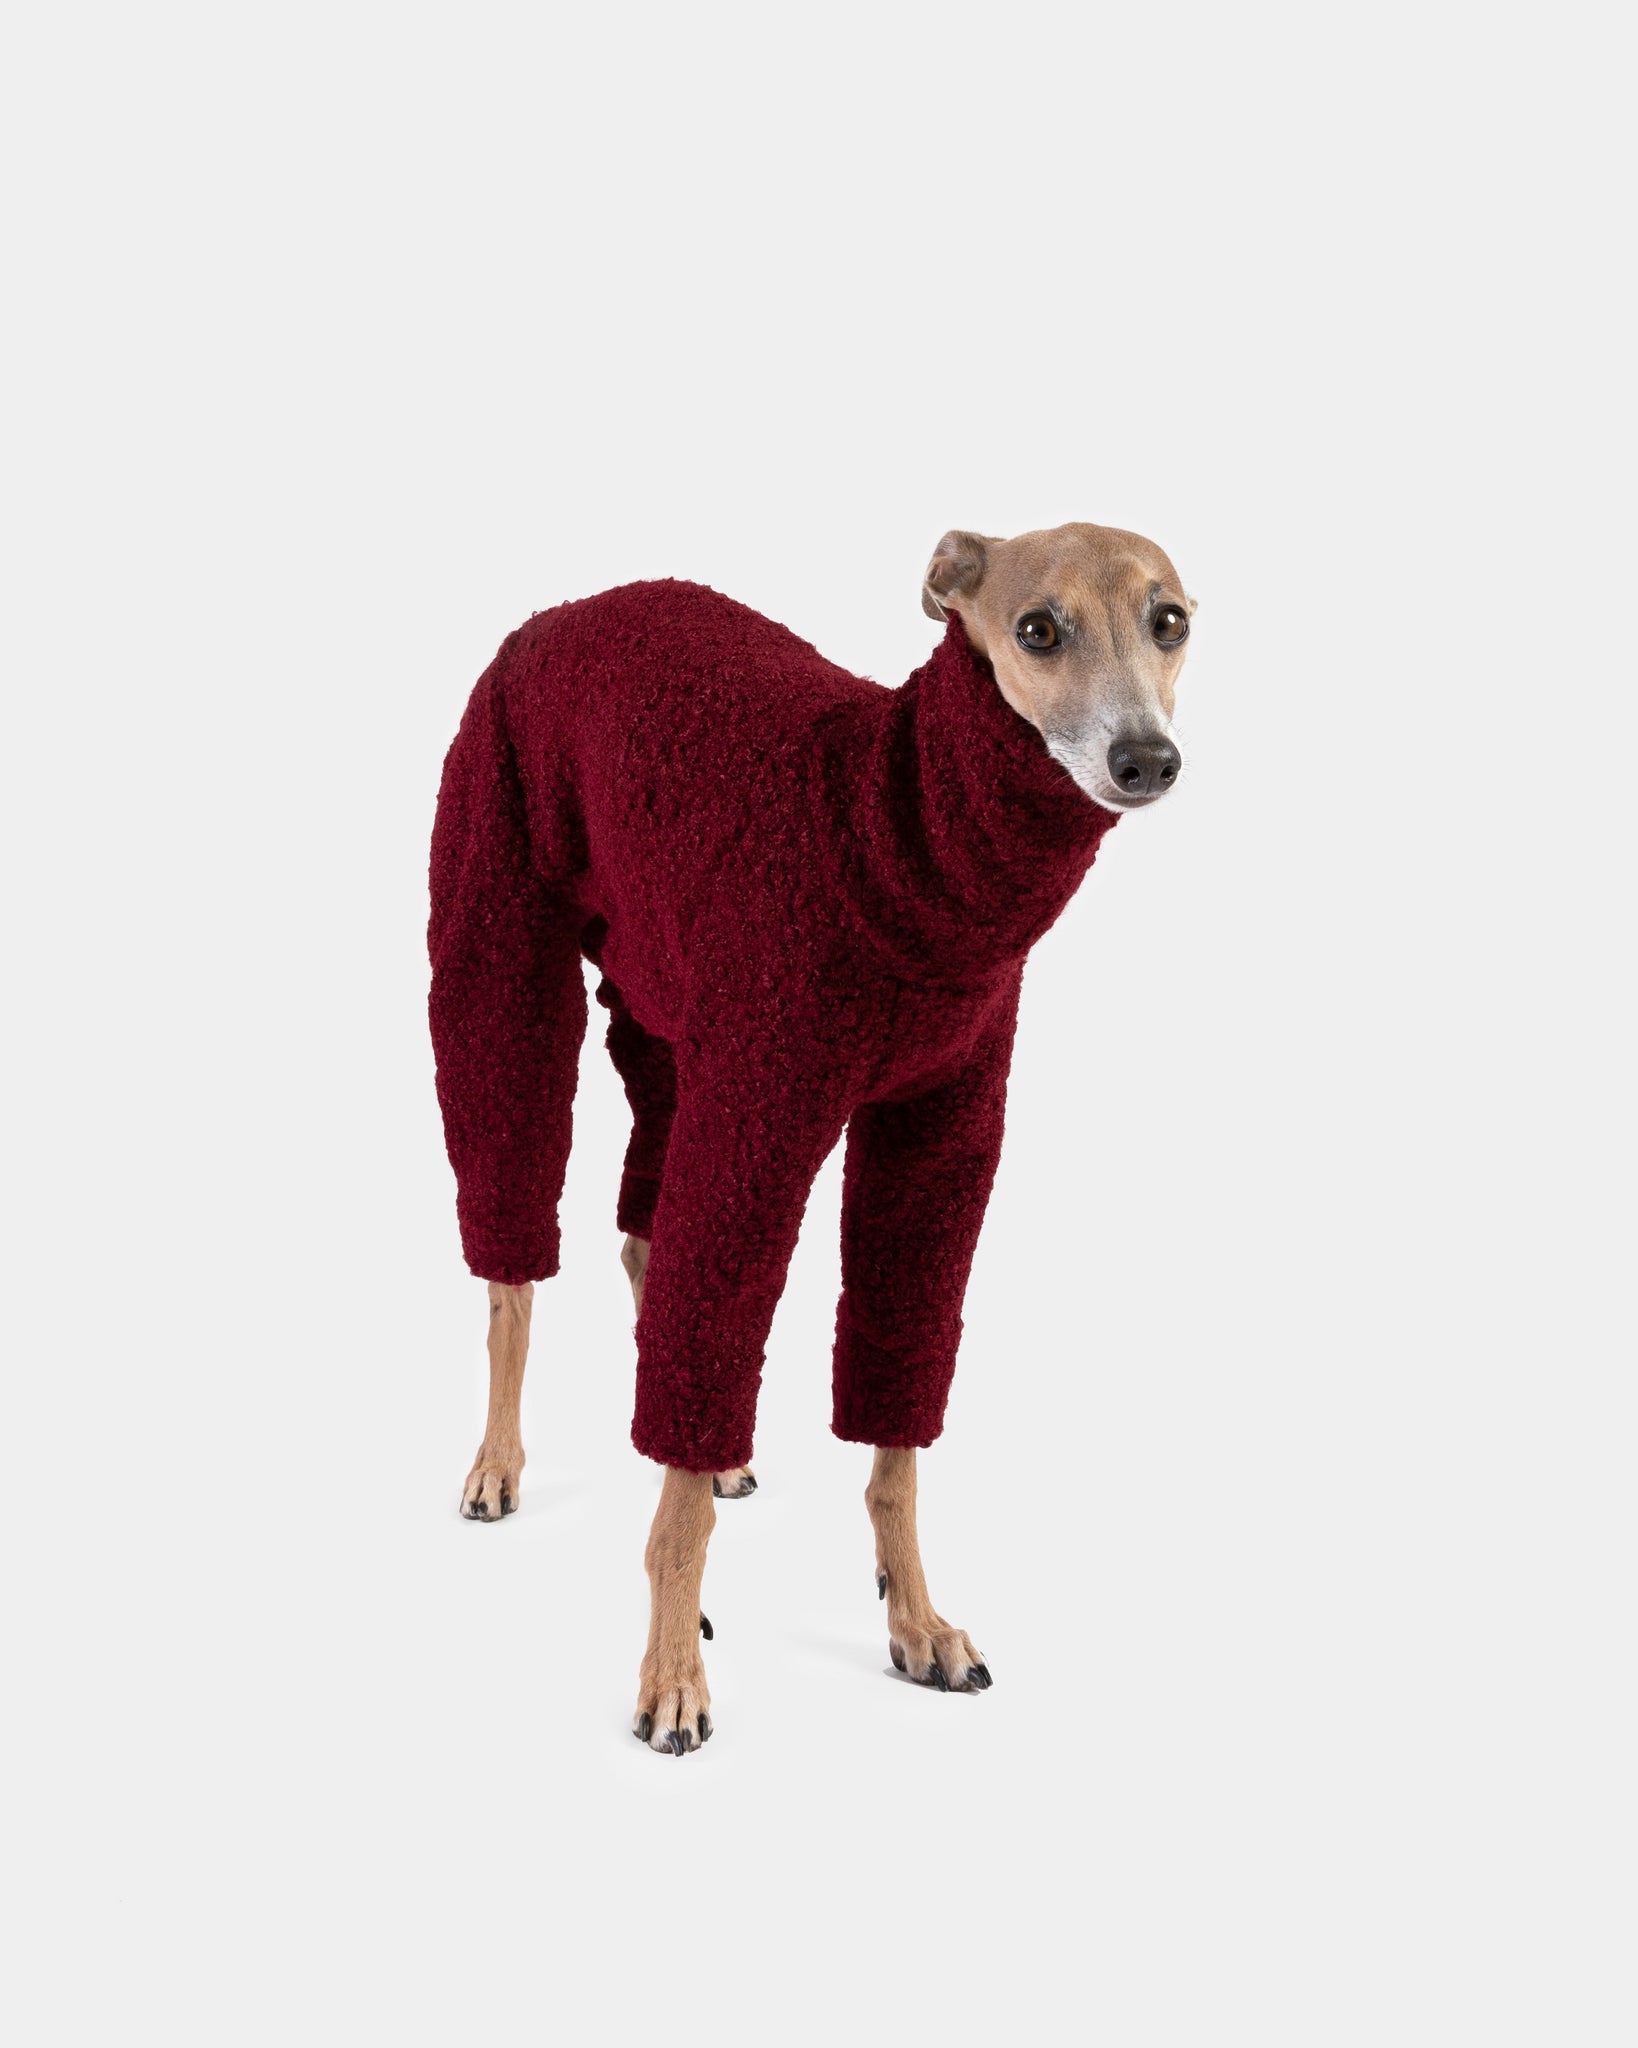 SUDADERA BOUCLE GRANATE 4 PATAS - WHIPPET SOLD OUT